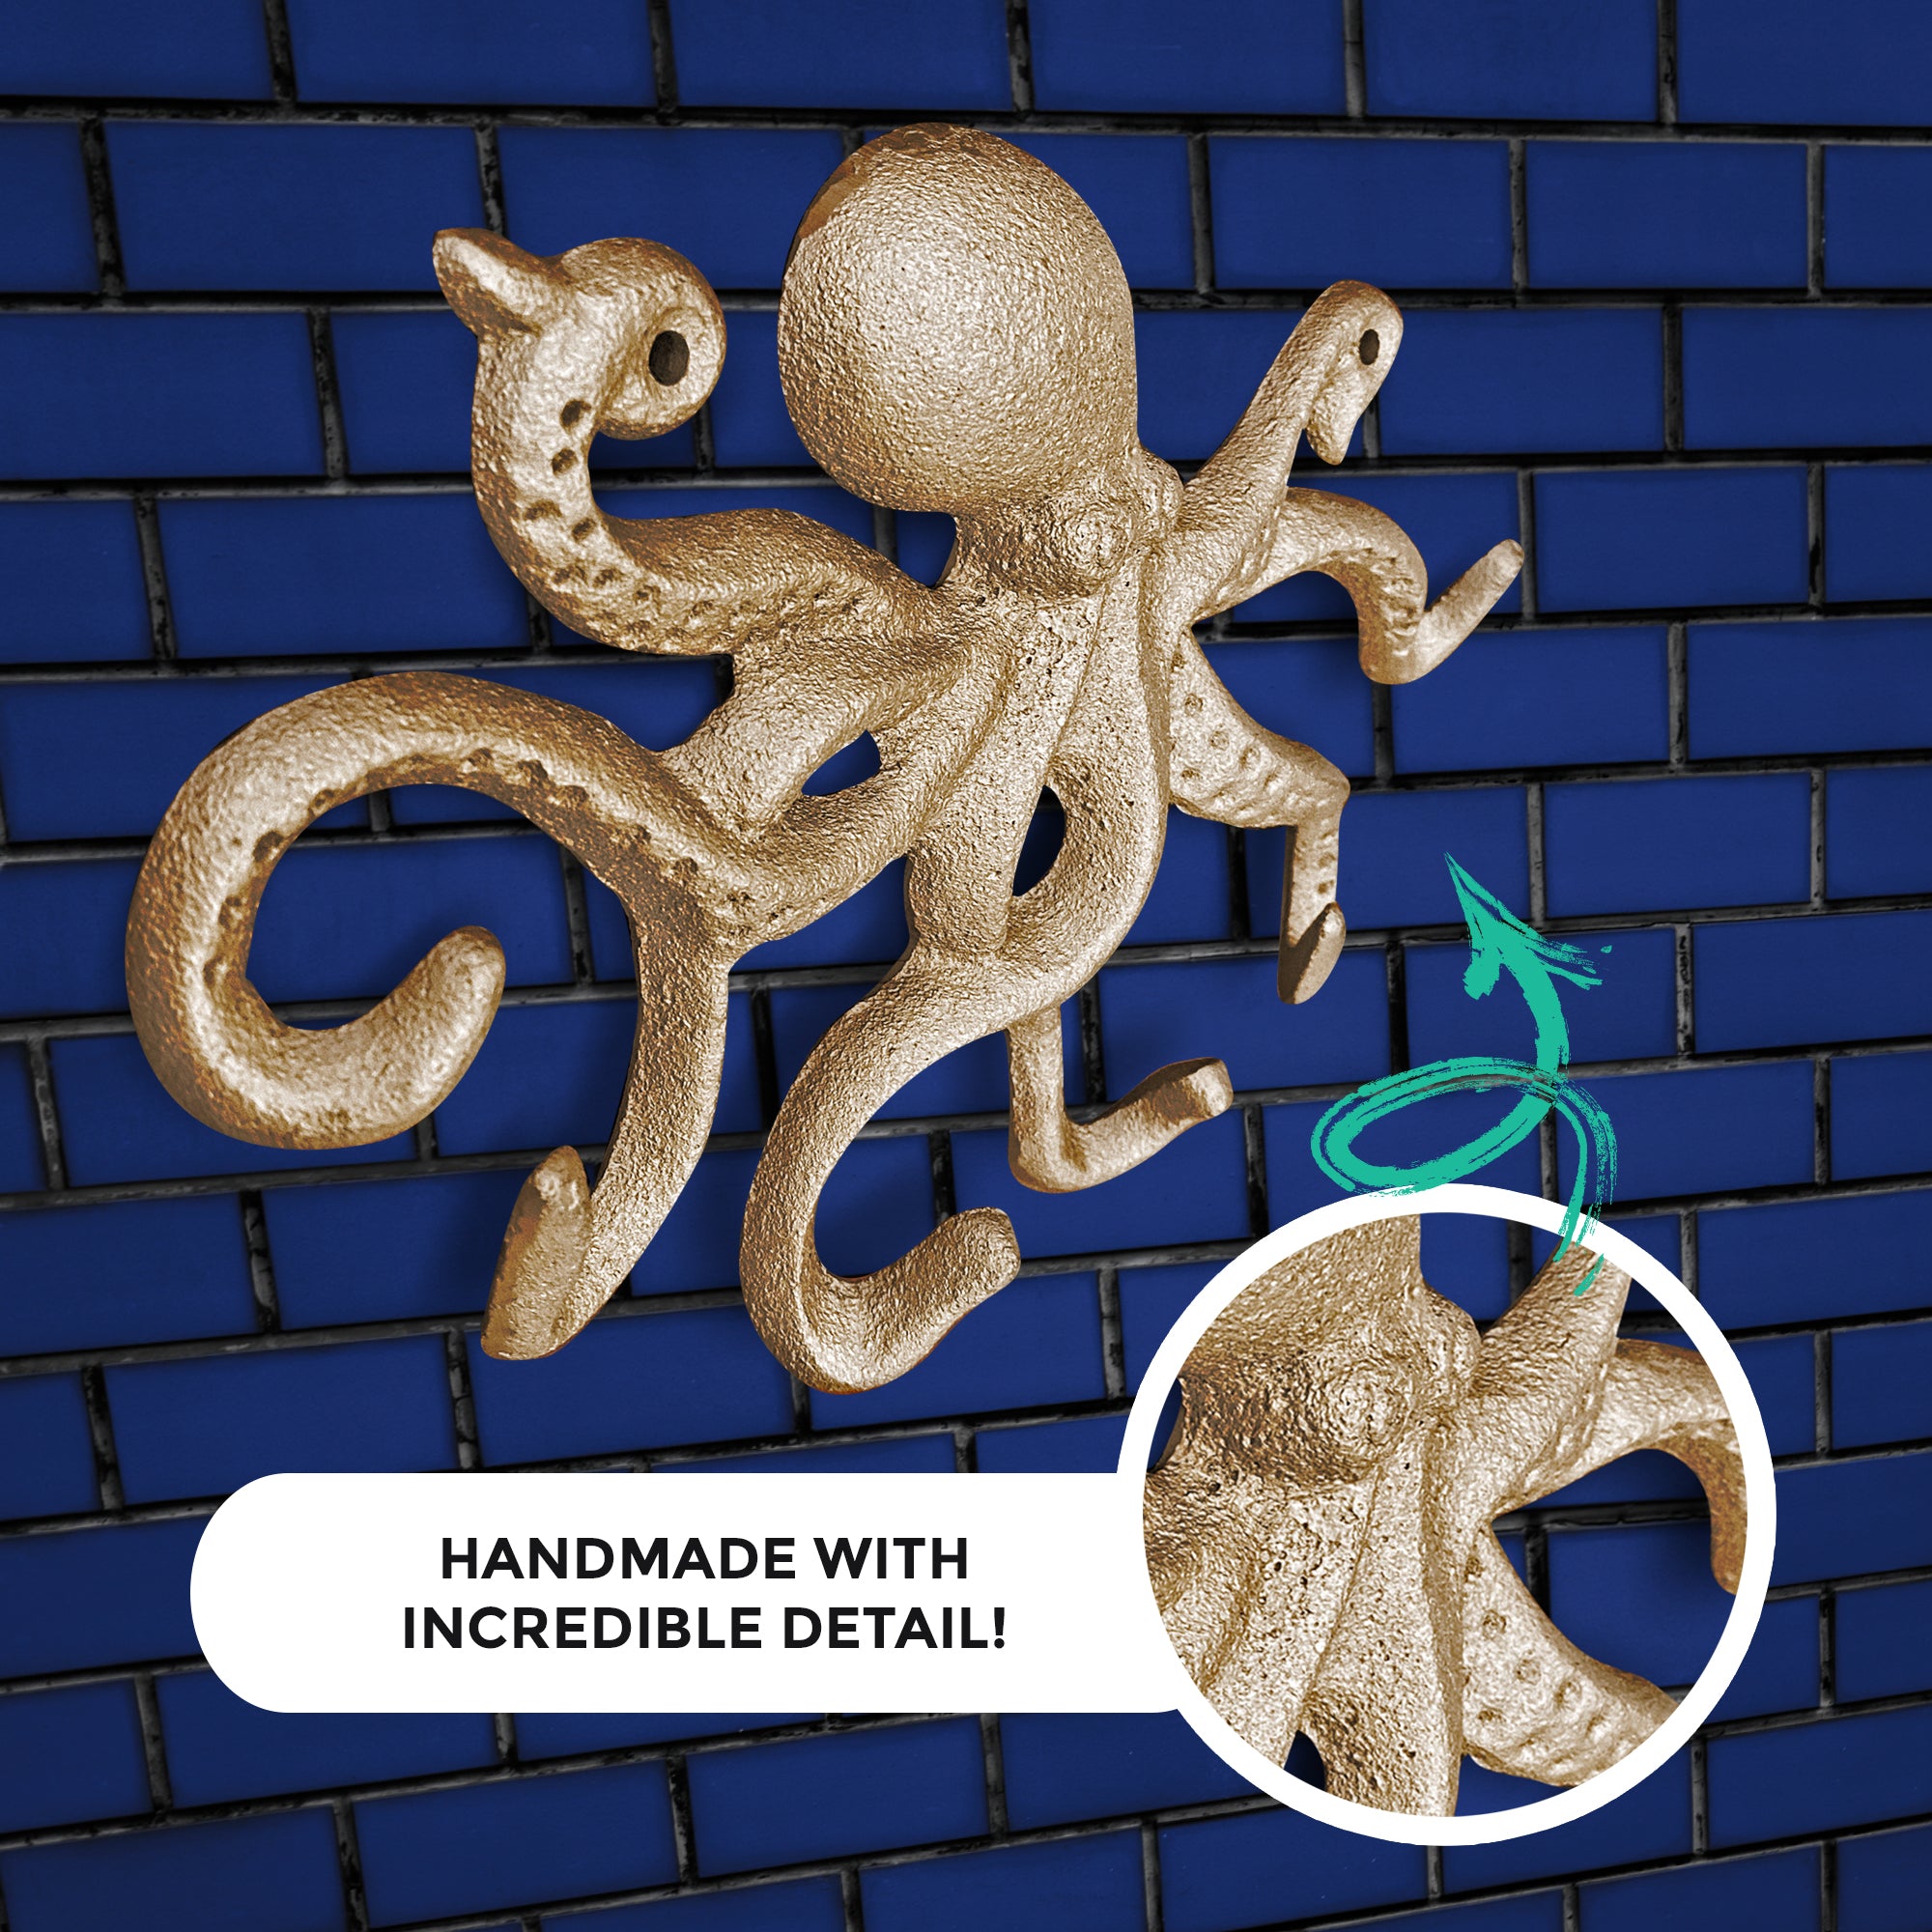 Gold Cast Iron Octopus Wall Hook, 10.5 – Wall Charmers